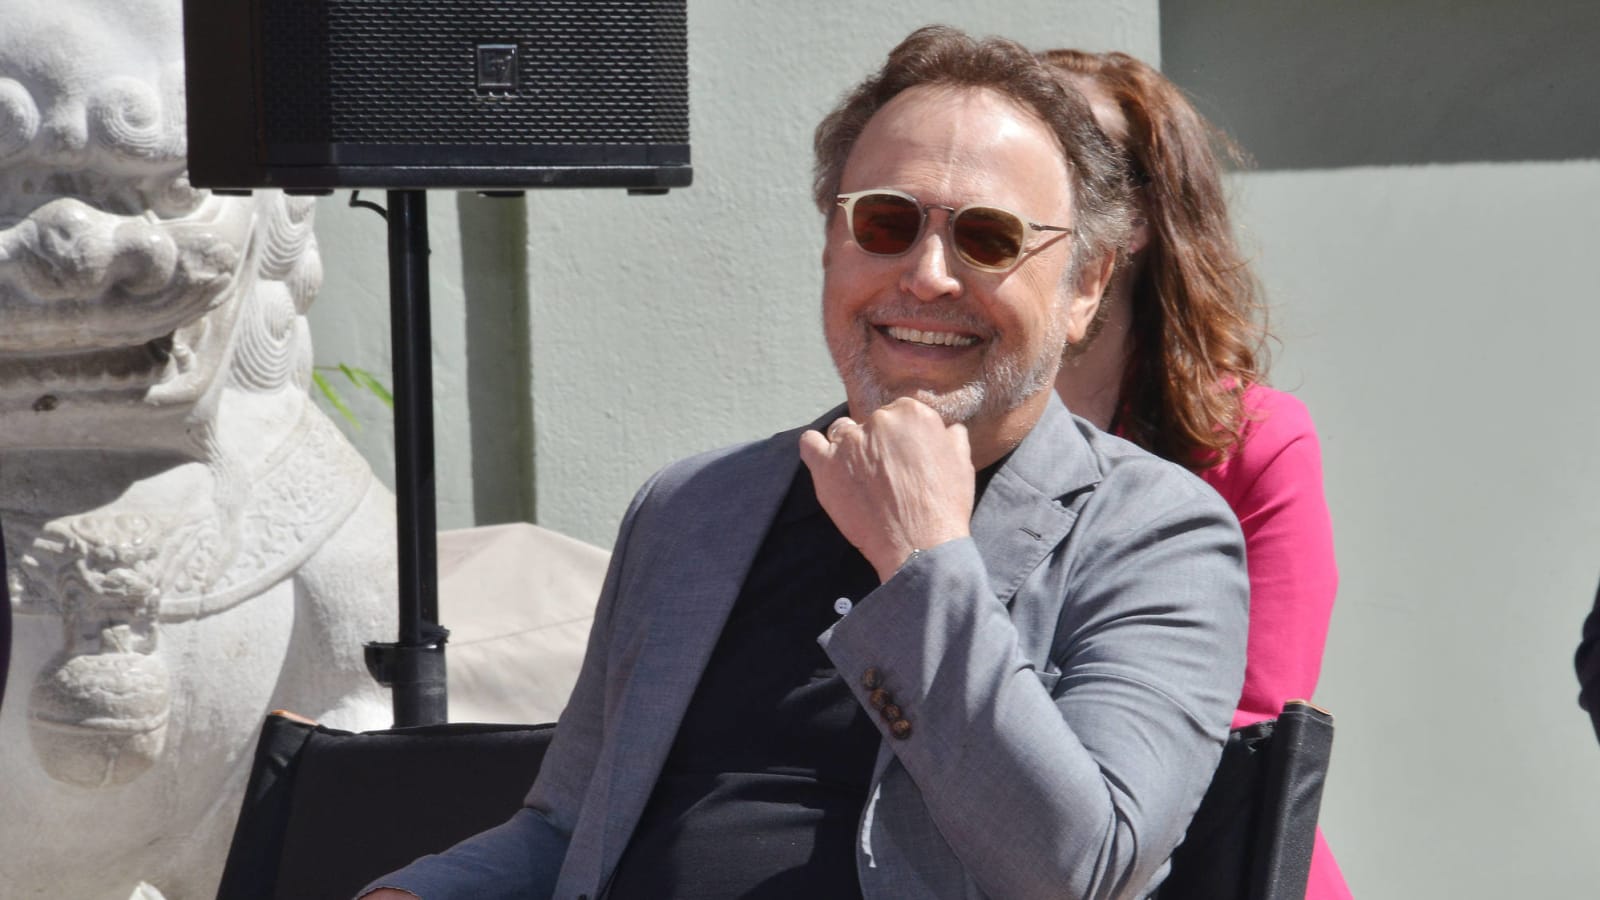 Billy Crystal reflects on hosting the Oscars nine times: 'It's a tough gig'